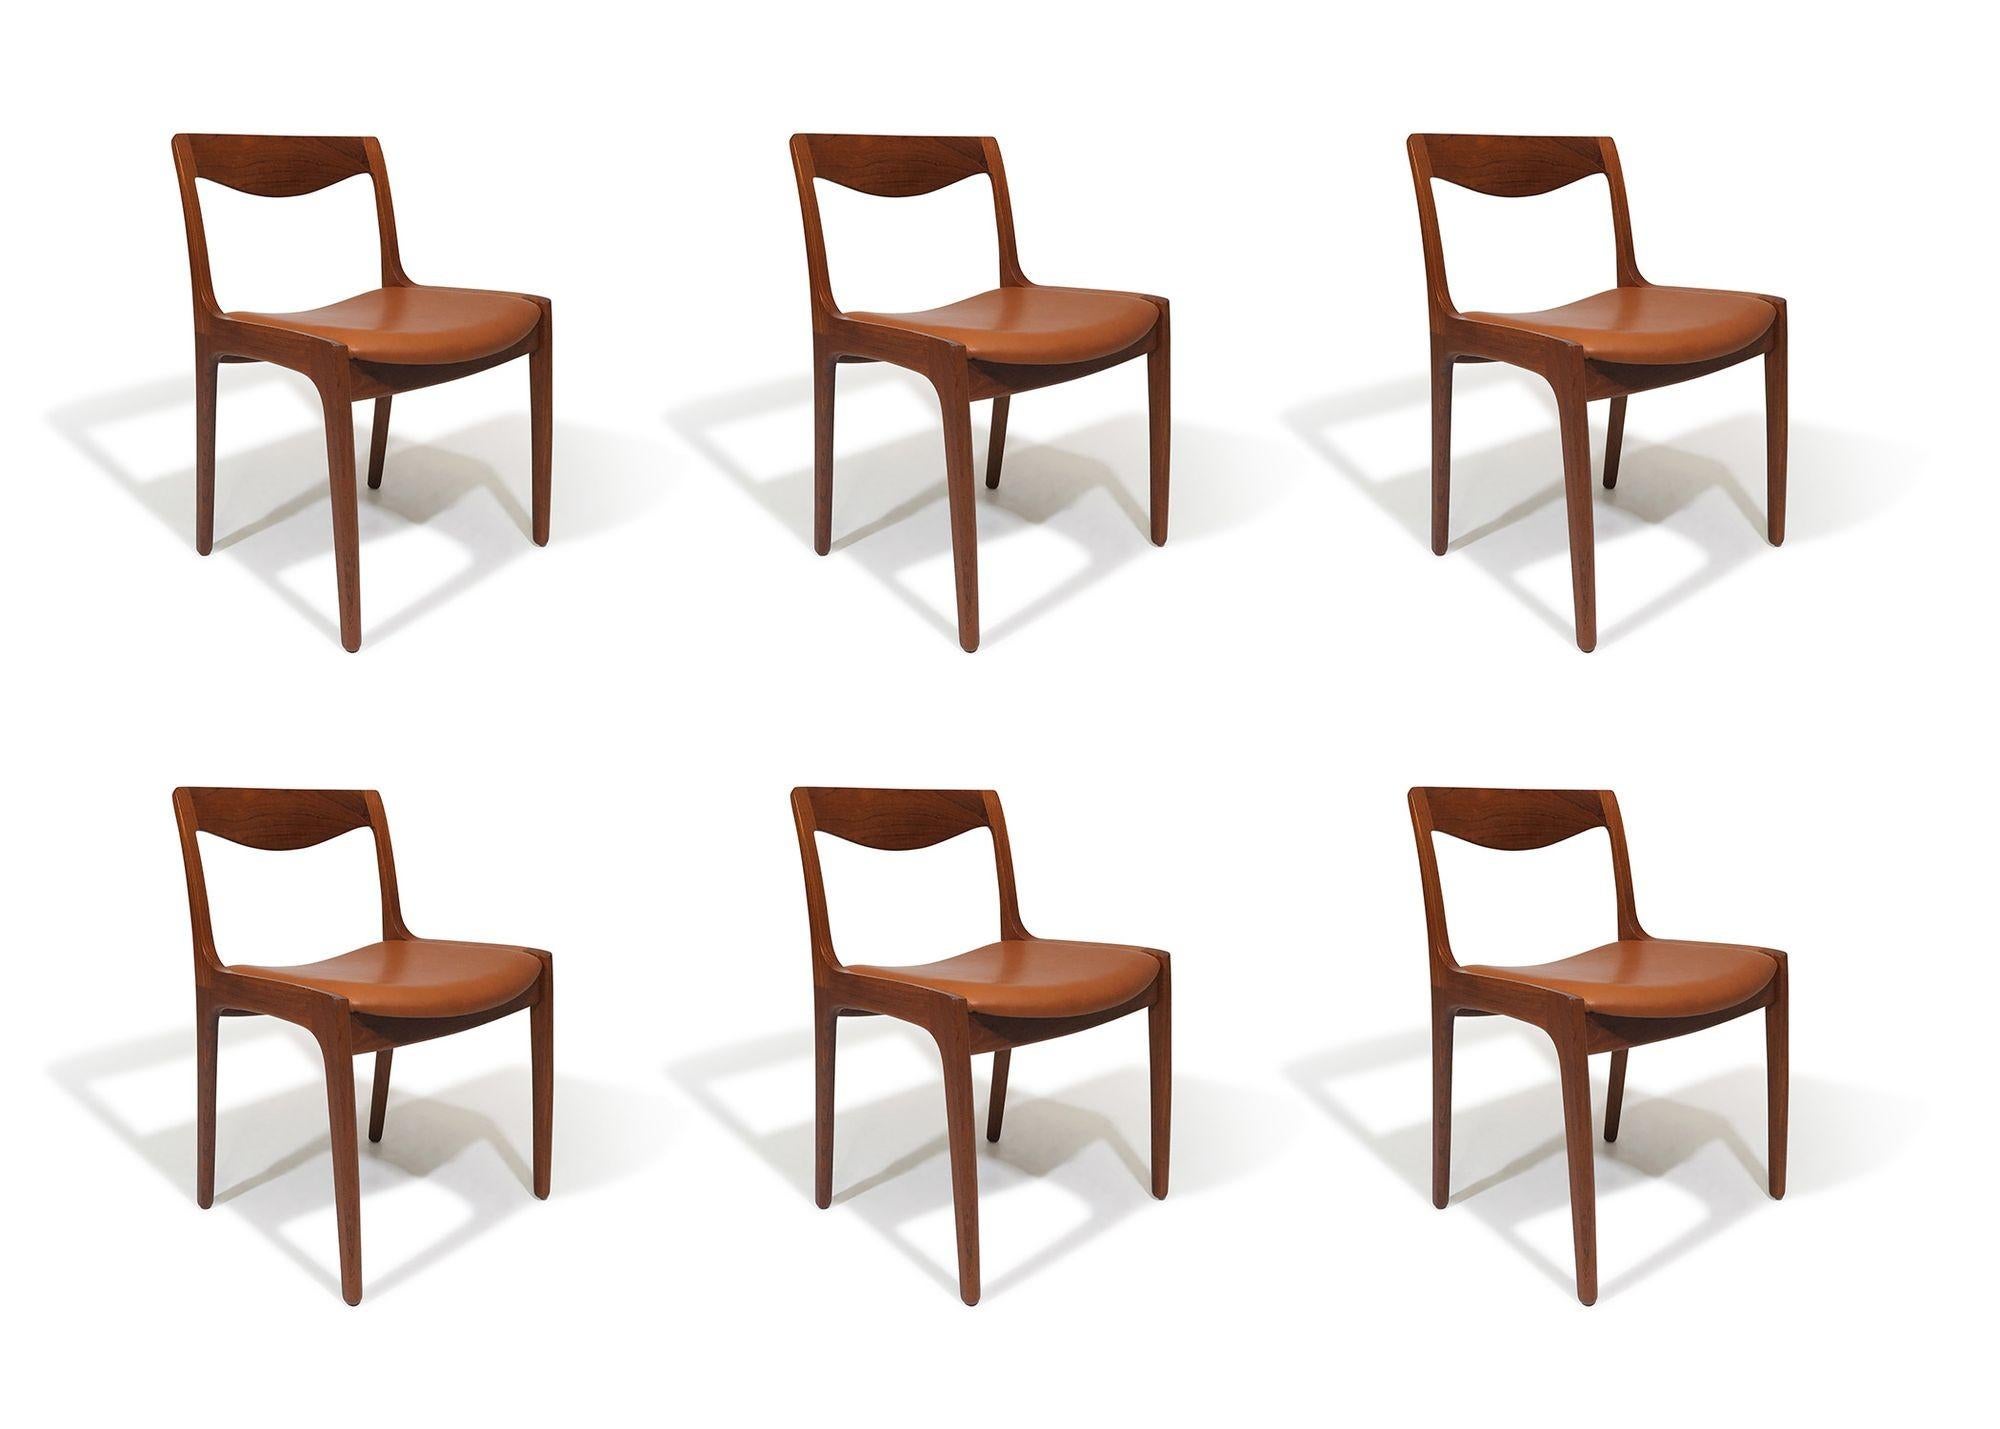 Midcentury Danish dining chairs designed by Vilhelm Wohlert for Poul Jeppesen Møbelfabrik, Denmark, 1956. The chairs feature finely sculpted solid-teak backrests on teak frames, showcasing exposed finger joinery. The set of chairs have been fully